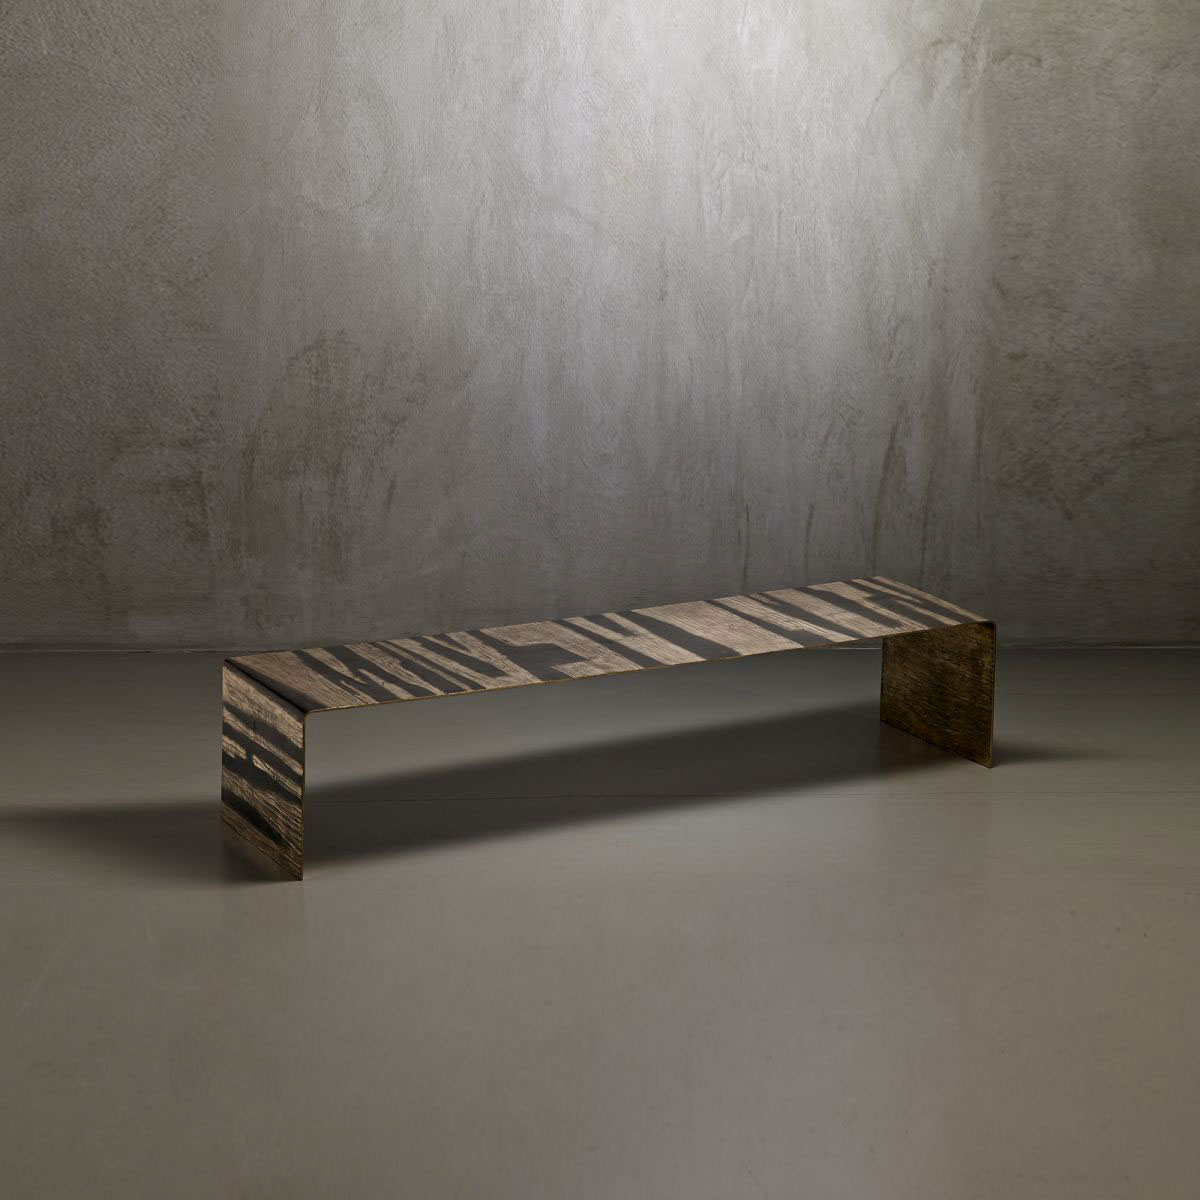 'Tracce' collection low table Osanna Visconti pic-1